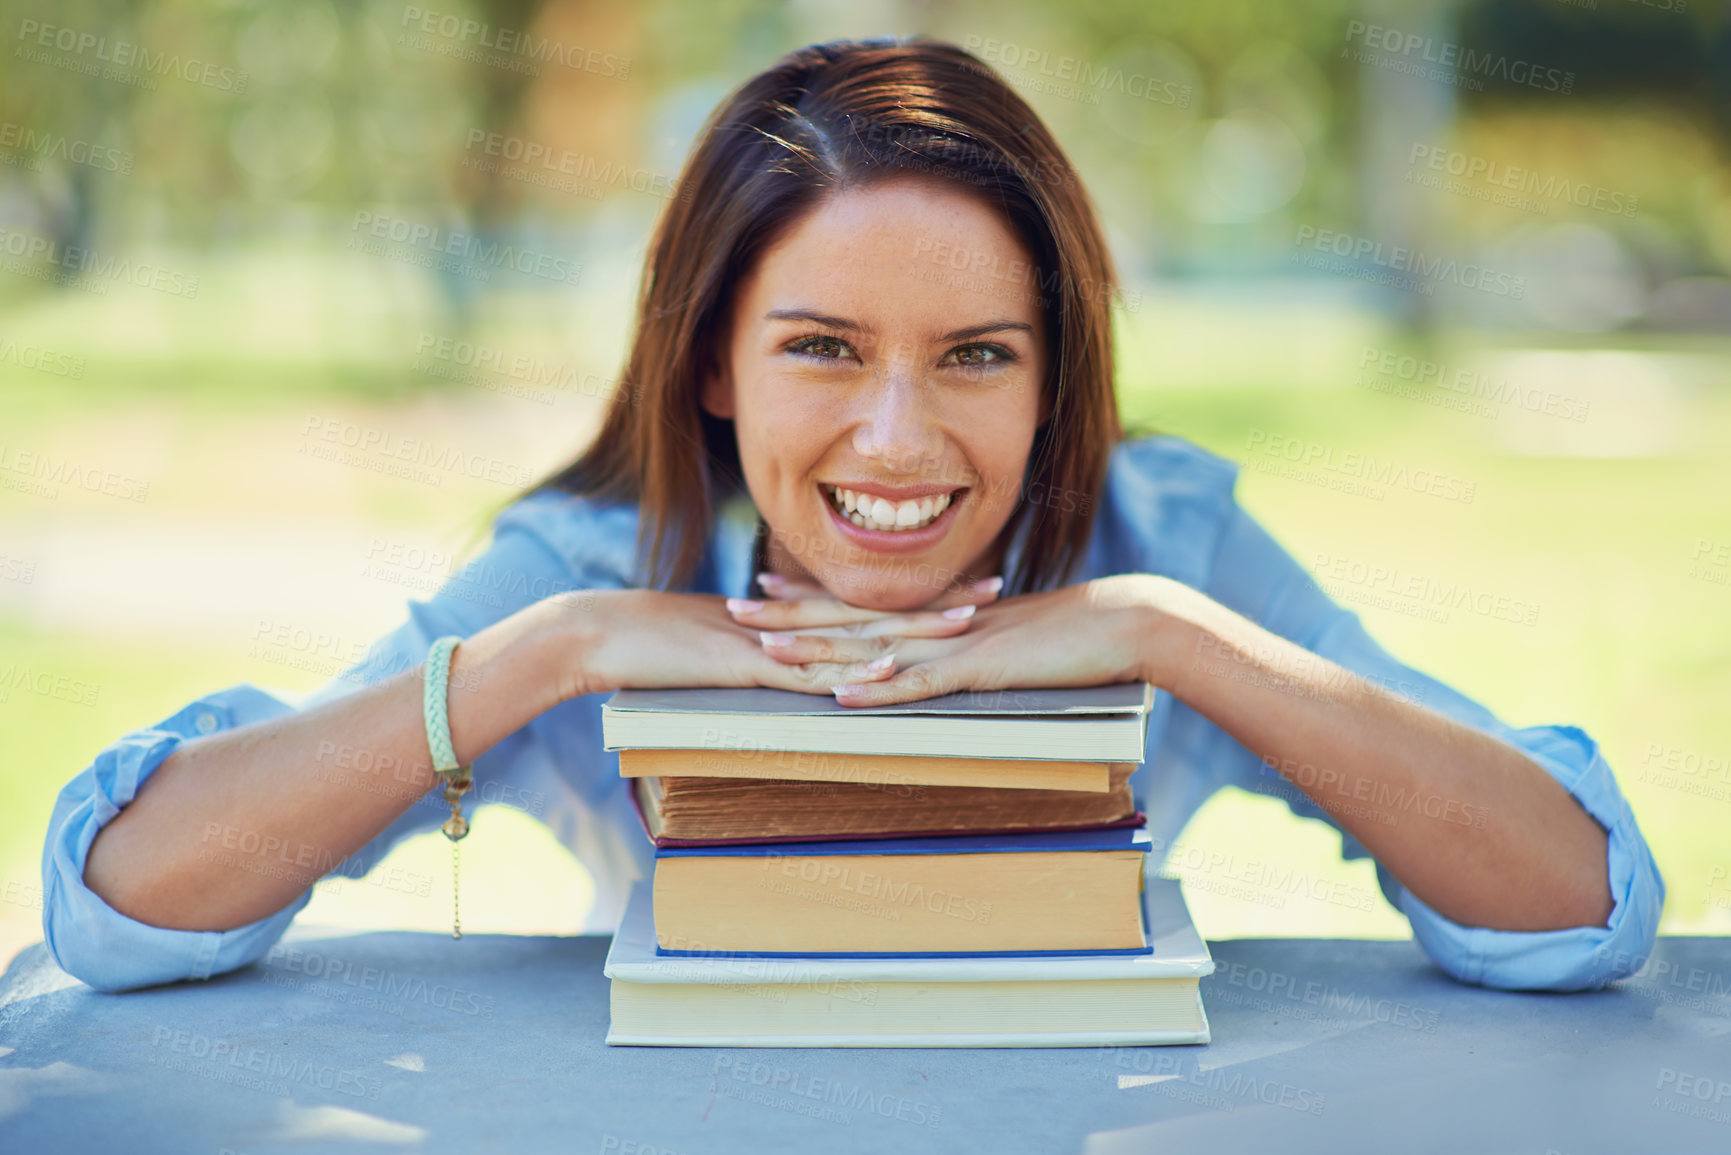 Buy stock photo Woman, student and portrait with books for outdoor learning, education and knowledge in park or campus. Face of a happy young person with literature, university and resources for studying at a table